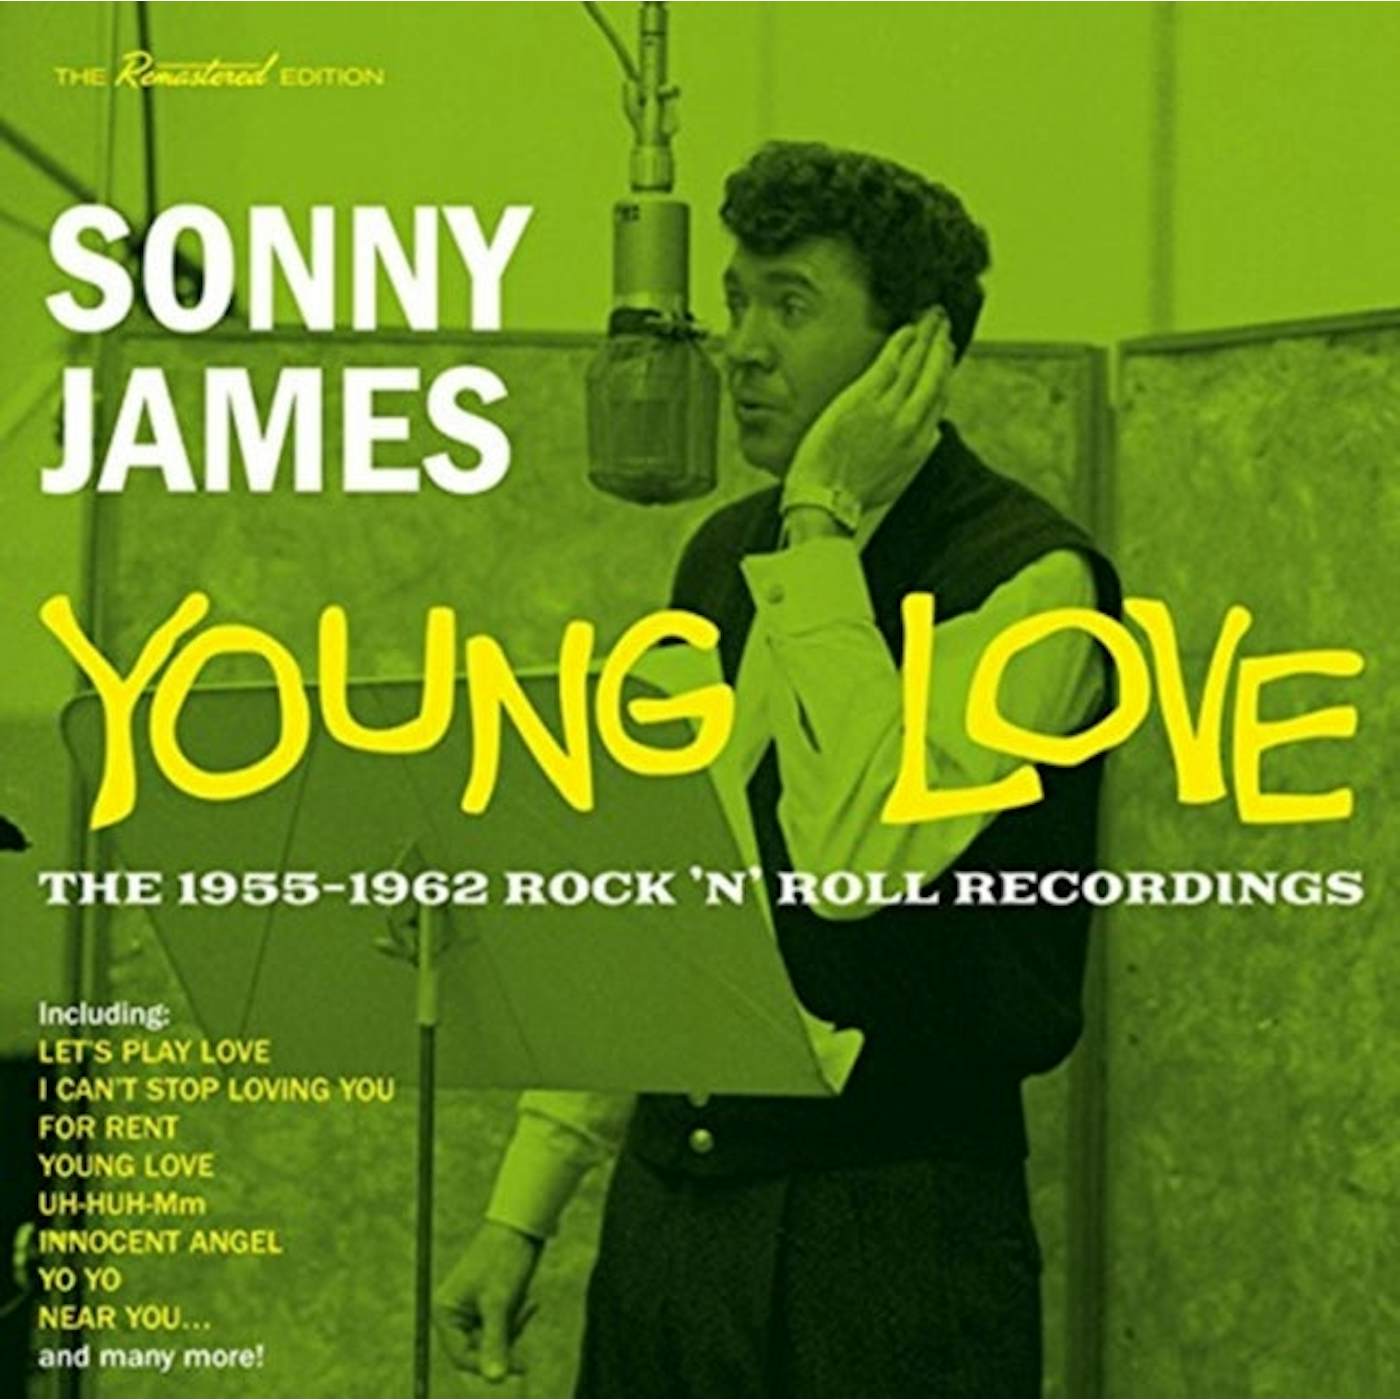 Sonny James CD - Young Love